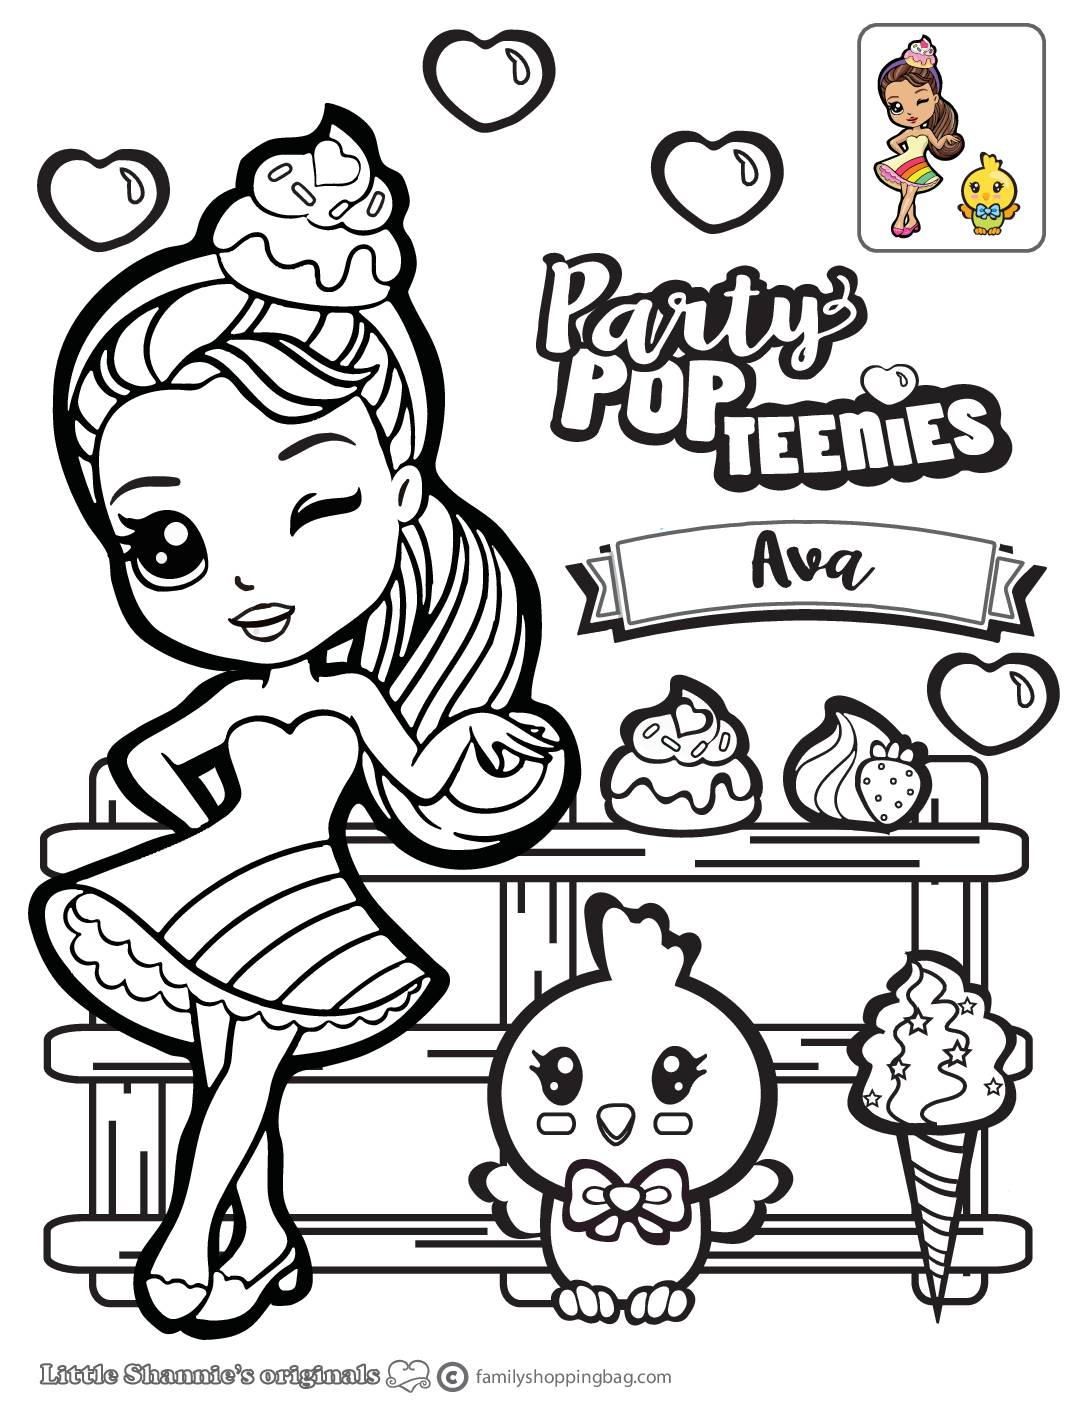 Ava Coloring Page Party Pop Teenies  pdf